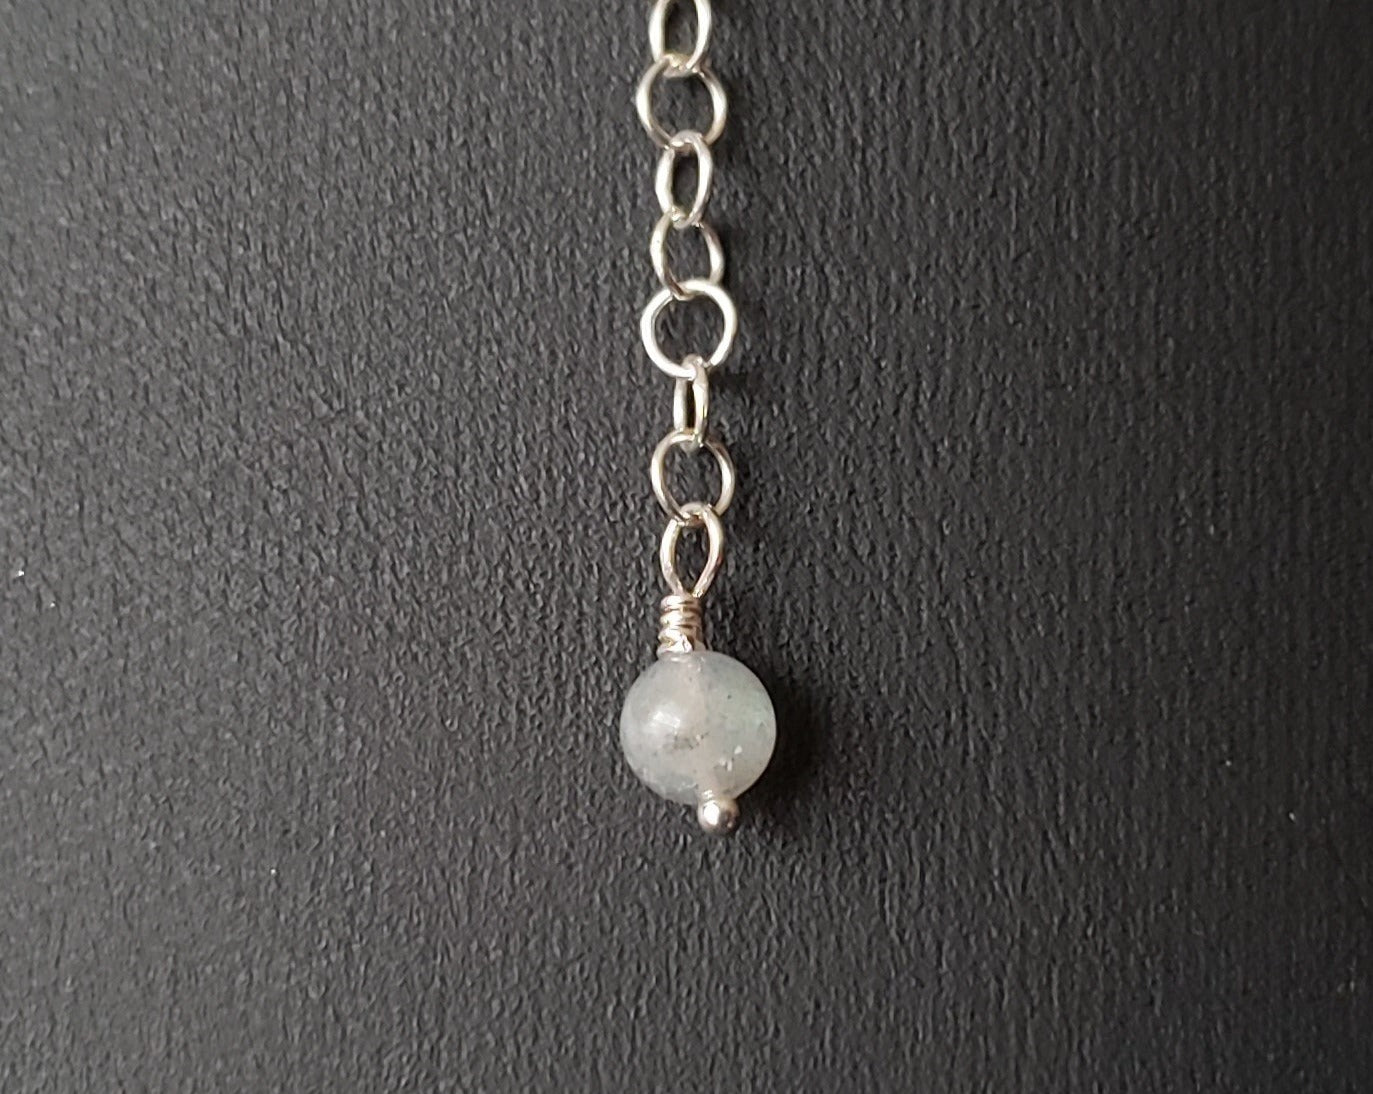 Lbaradorite dangle on the end of the back extension chain